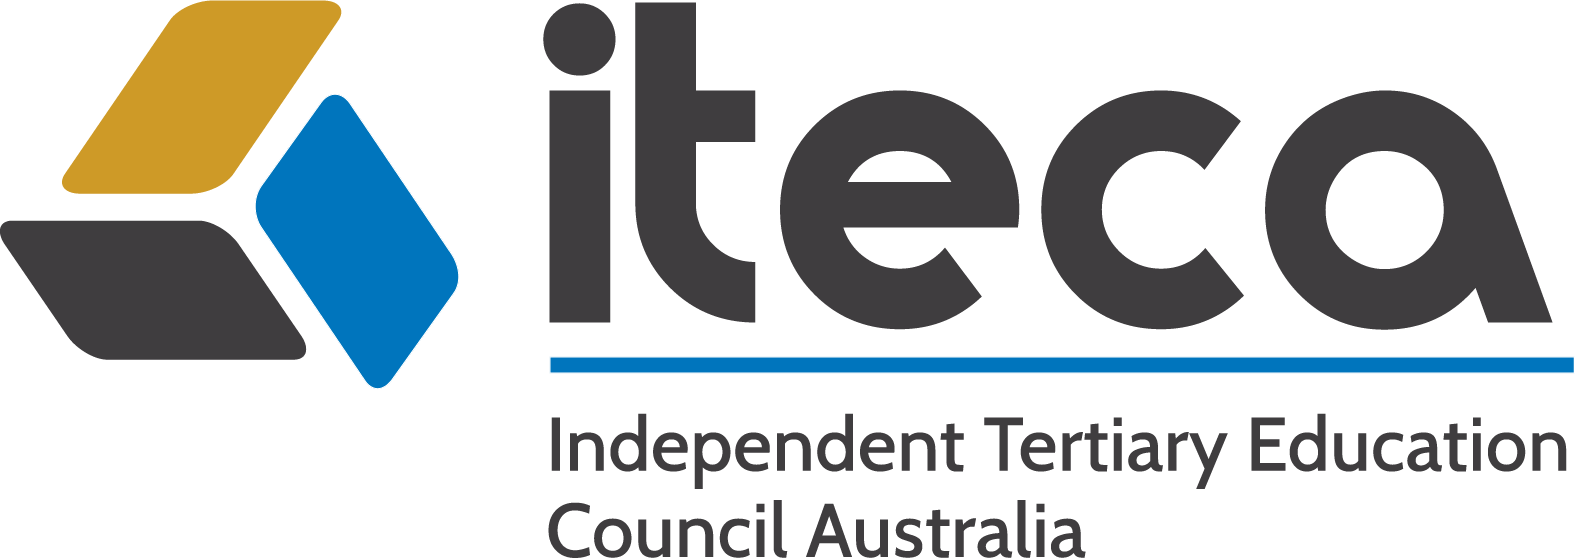 Independent Tertiary Education Council Australia